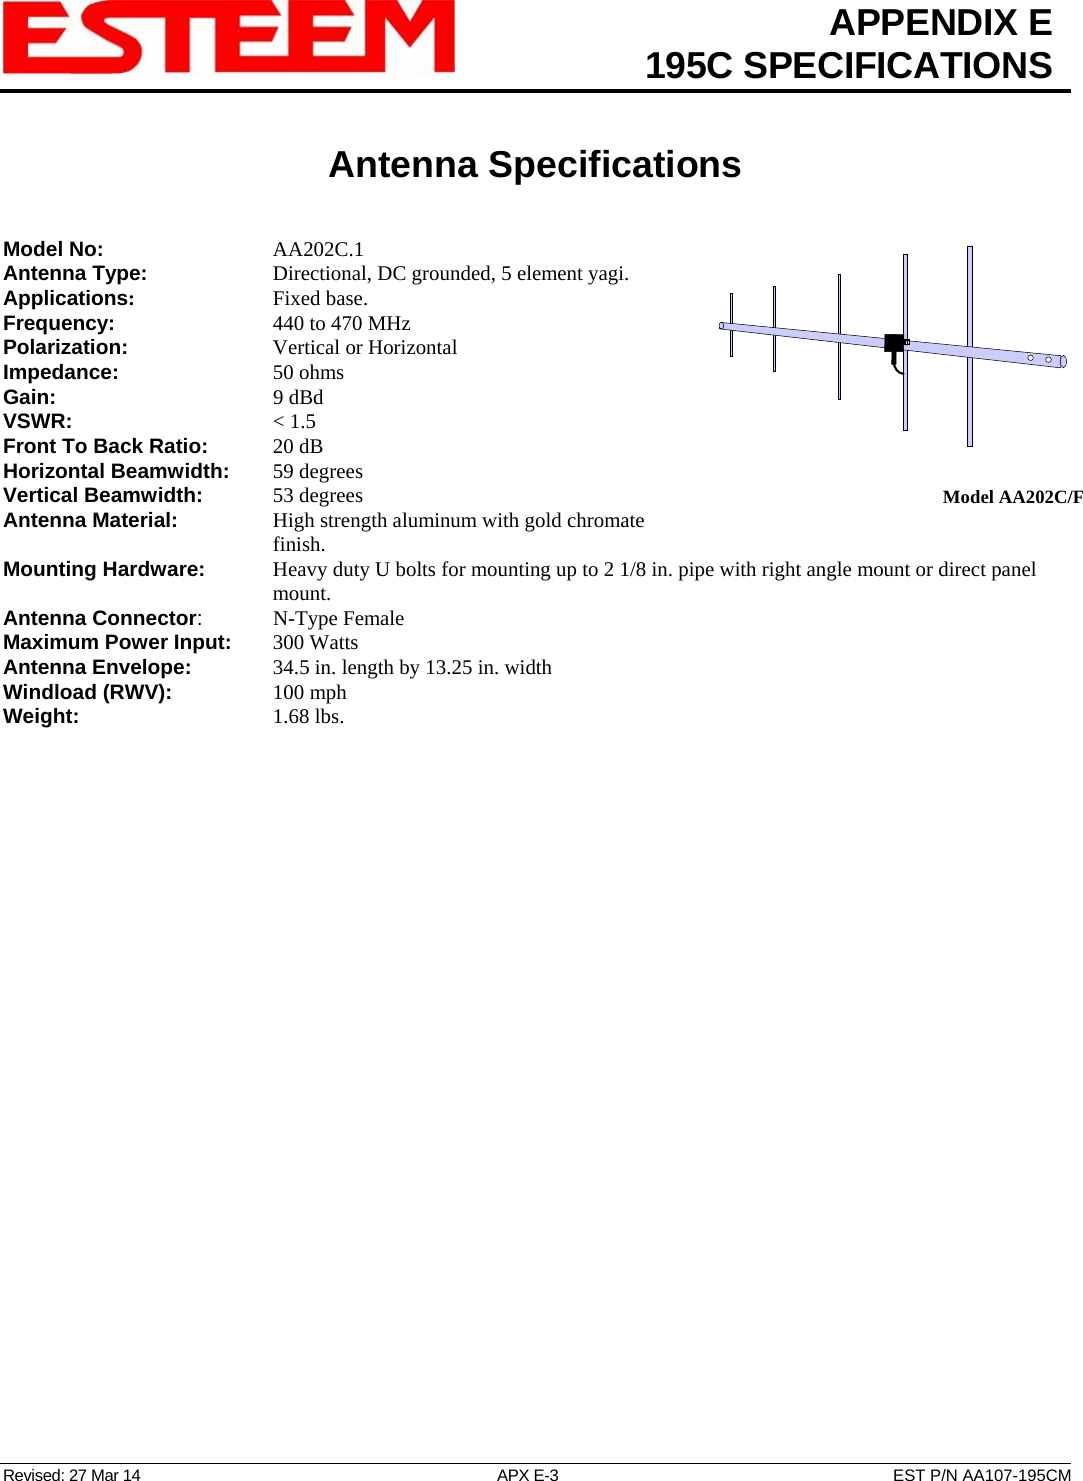  APPENDIX E  195C SPECIFICATIONS   Antenna Specifications   Revised: 27 Mar 14  APX E-3  EST P/N AA107-195CM  Model AA202C/FModel No:    AA202C.1 Antenna Type:      Directional, DC grounded, 5 element yagi.  Applications:    Fixed base. Frequency:    440 to 470 MHz Polarization:    Vertical or Horizontal Impedance:    50 ohms Gain:     9 dBd VSWR:      &lt; 1.5  Front To Back Ratio:   20 dB Horizontal Beamwidth:  59 degrees Vertical Beamwidth:      53 degrees Antenna Material:     High strength aluminum with gold chromate finish.  Mounting Hardware:      Heavy duty U bolts for mounting up to 2 1/8 in. pipe with right angle mount or direct panel mount. Antenna Connector:   N-Type Female Maximum Power Input: 300 Watts Antenna Envelope:    34.5 in. length by 13.25 in. width Windload (RWV):   100 mph Weight:     1.68 lbs.        